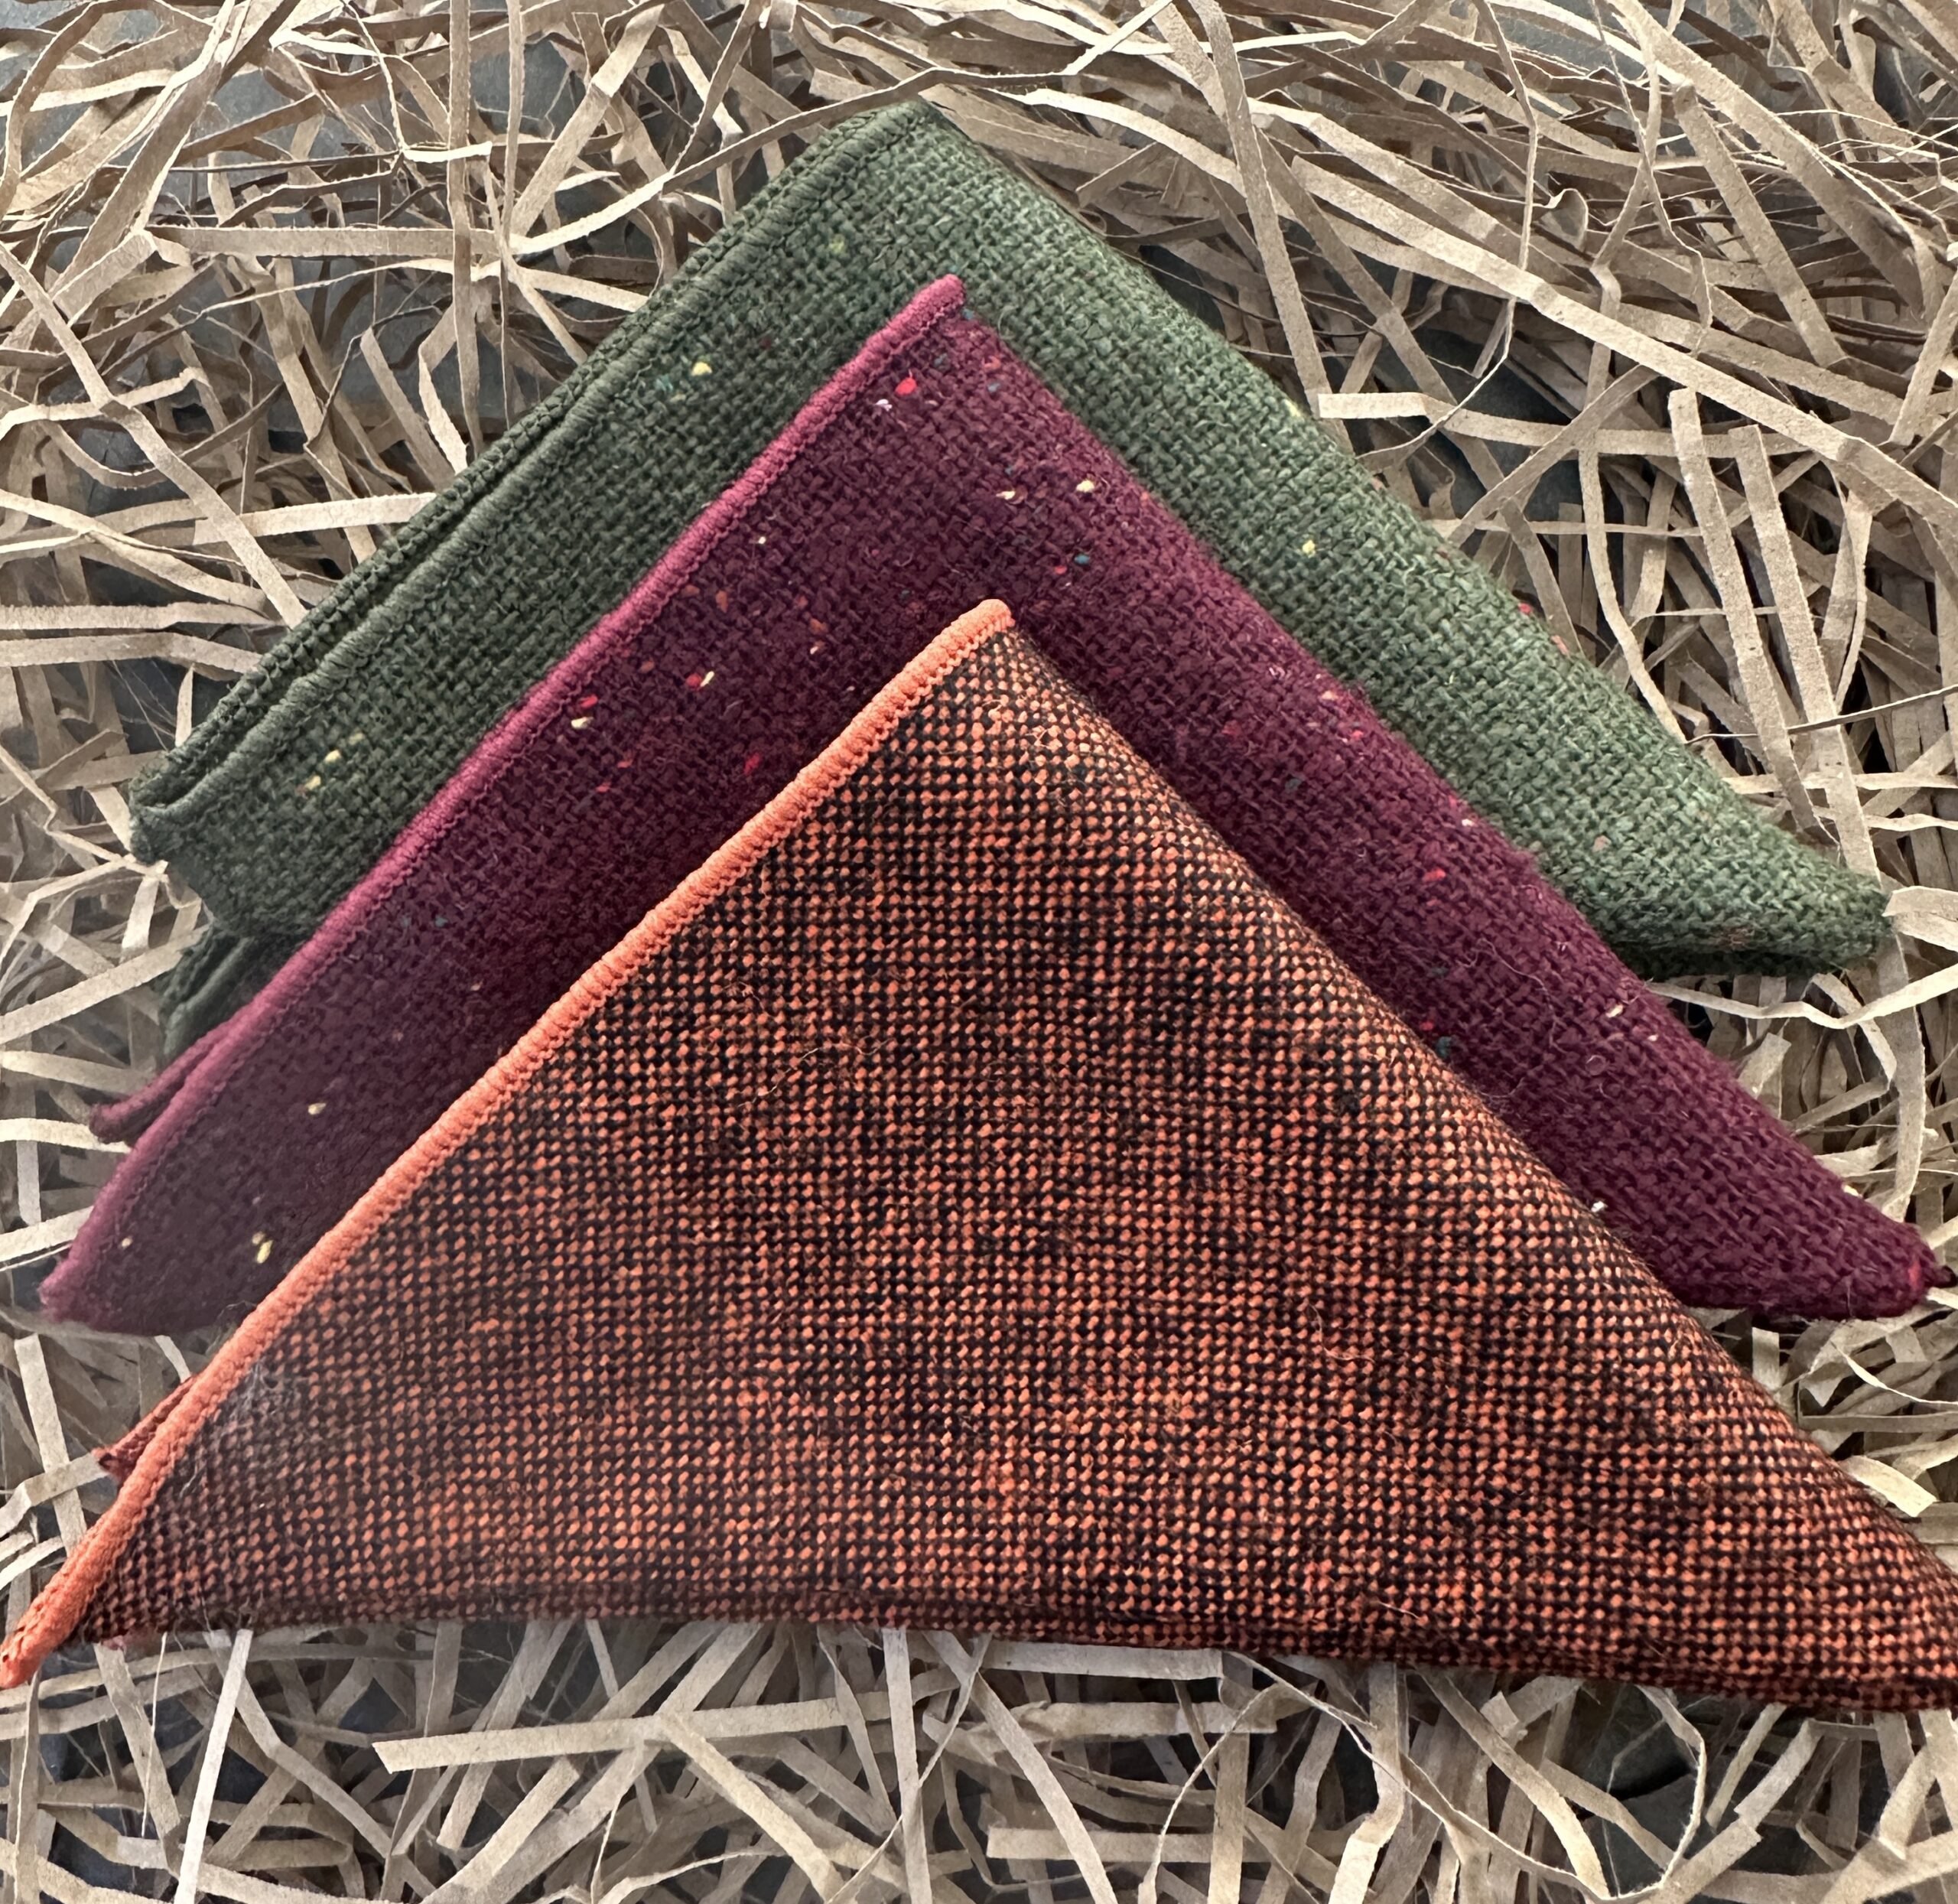 A set of three woollen pocket handkerchiefs in burgundy res, green and burnt orange ideal as groomsmen and mens gifts